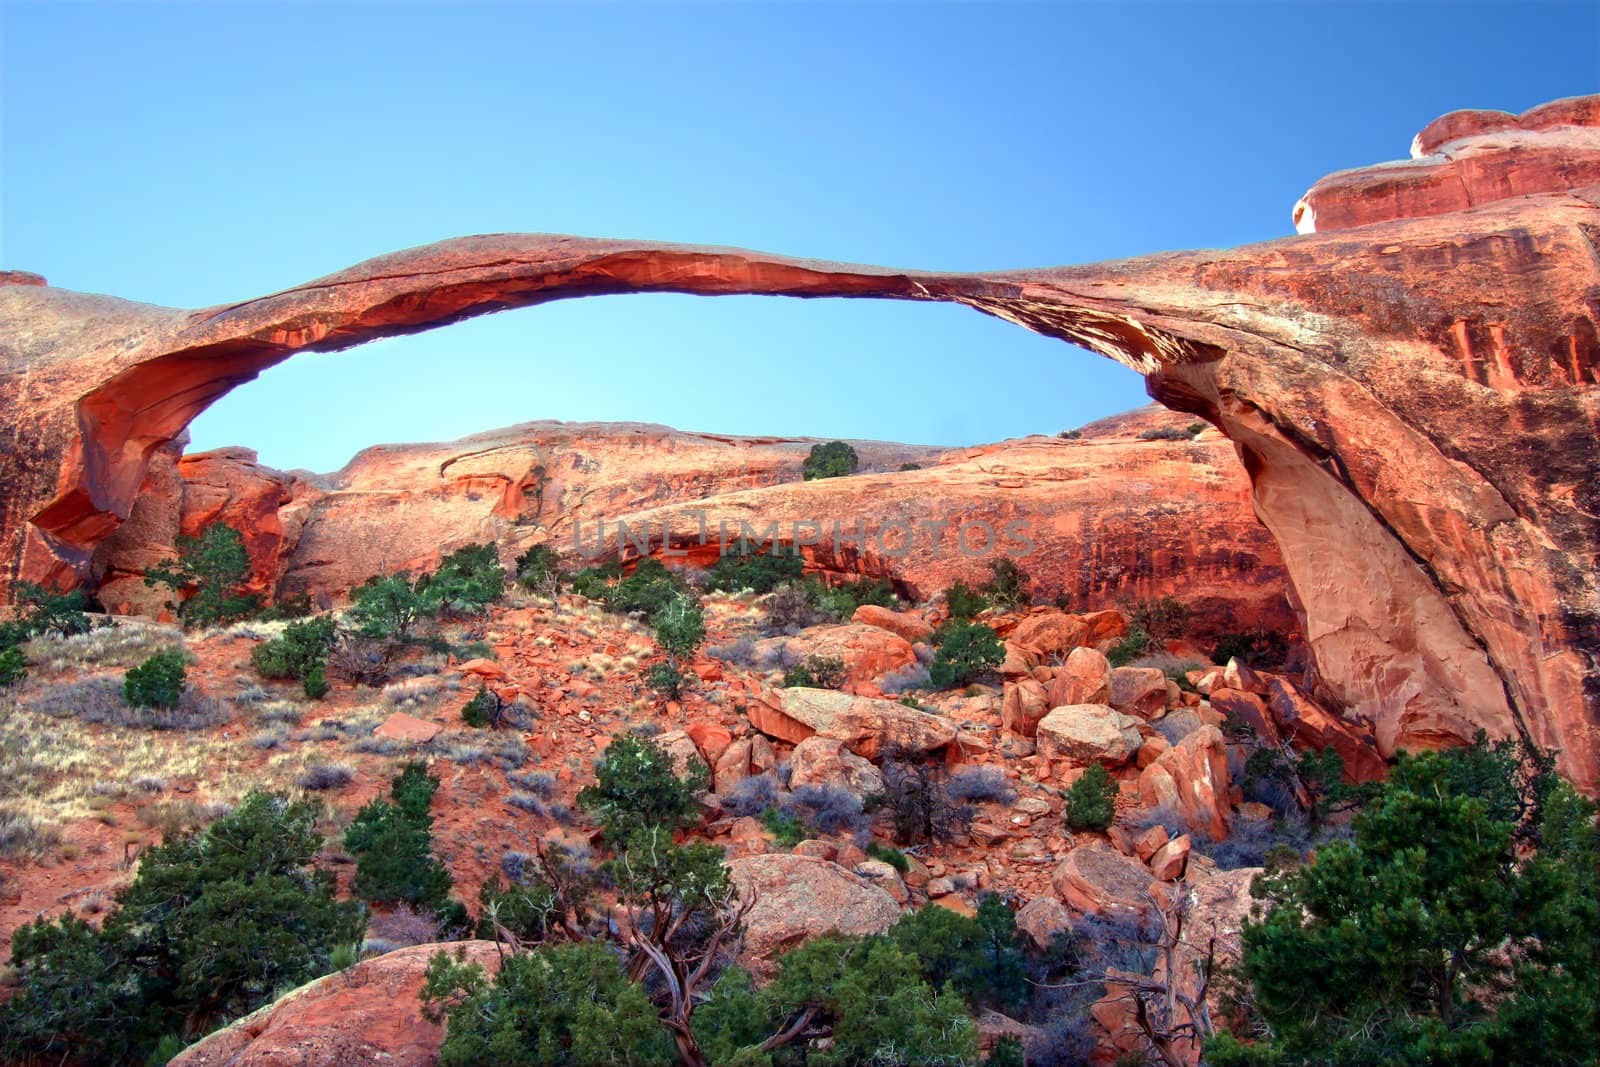 Landscape Arch stretches across the skyline at Arches National Park in Utah.